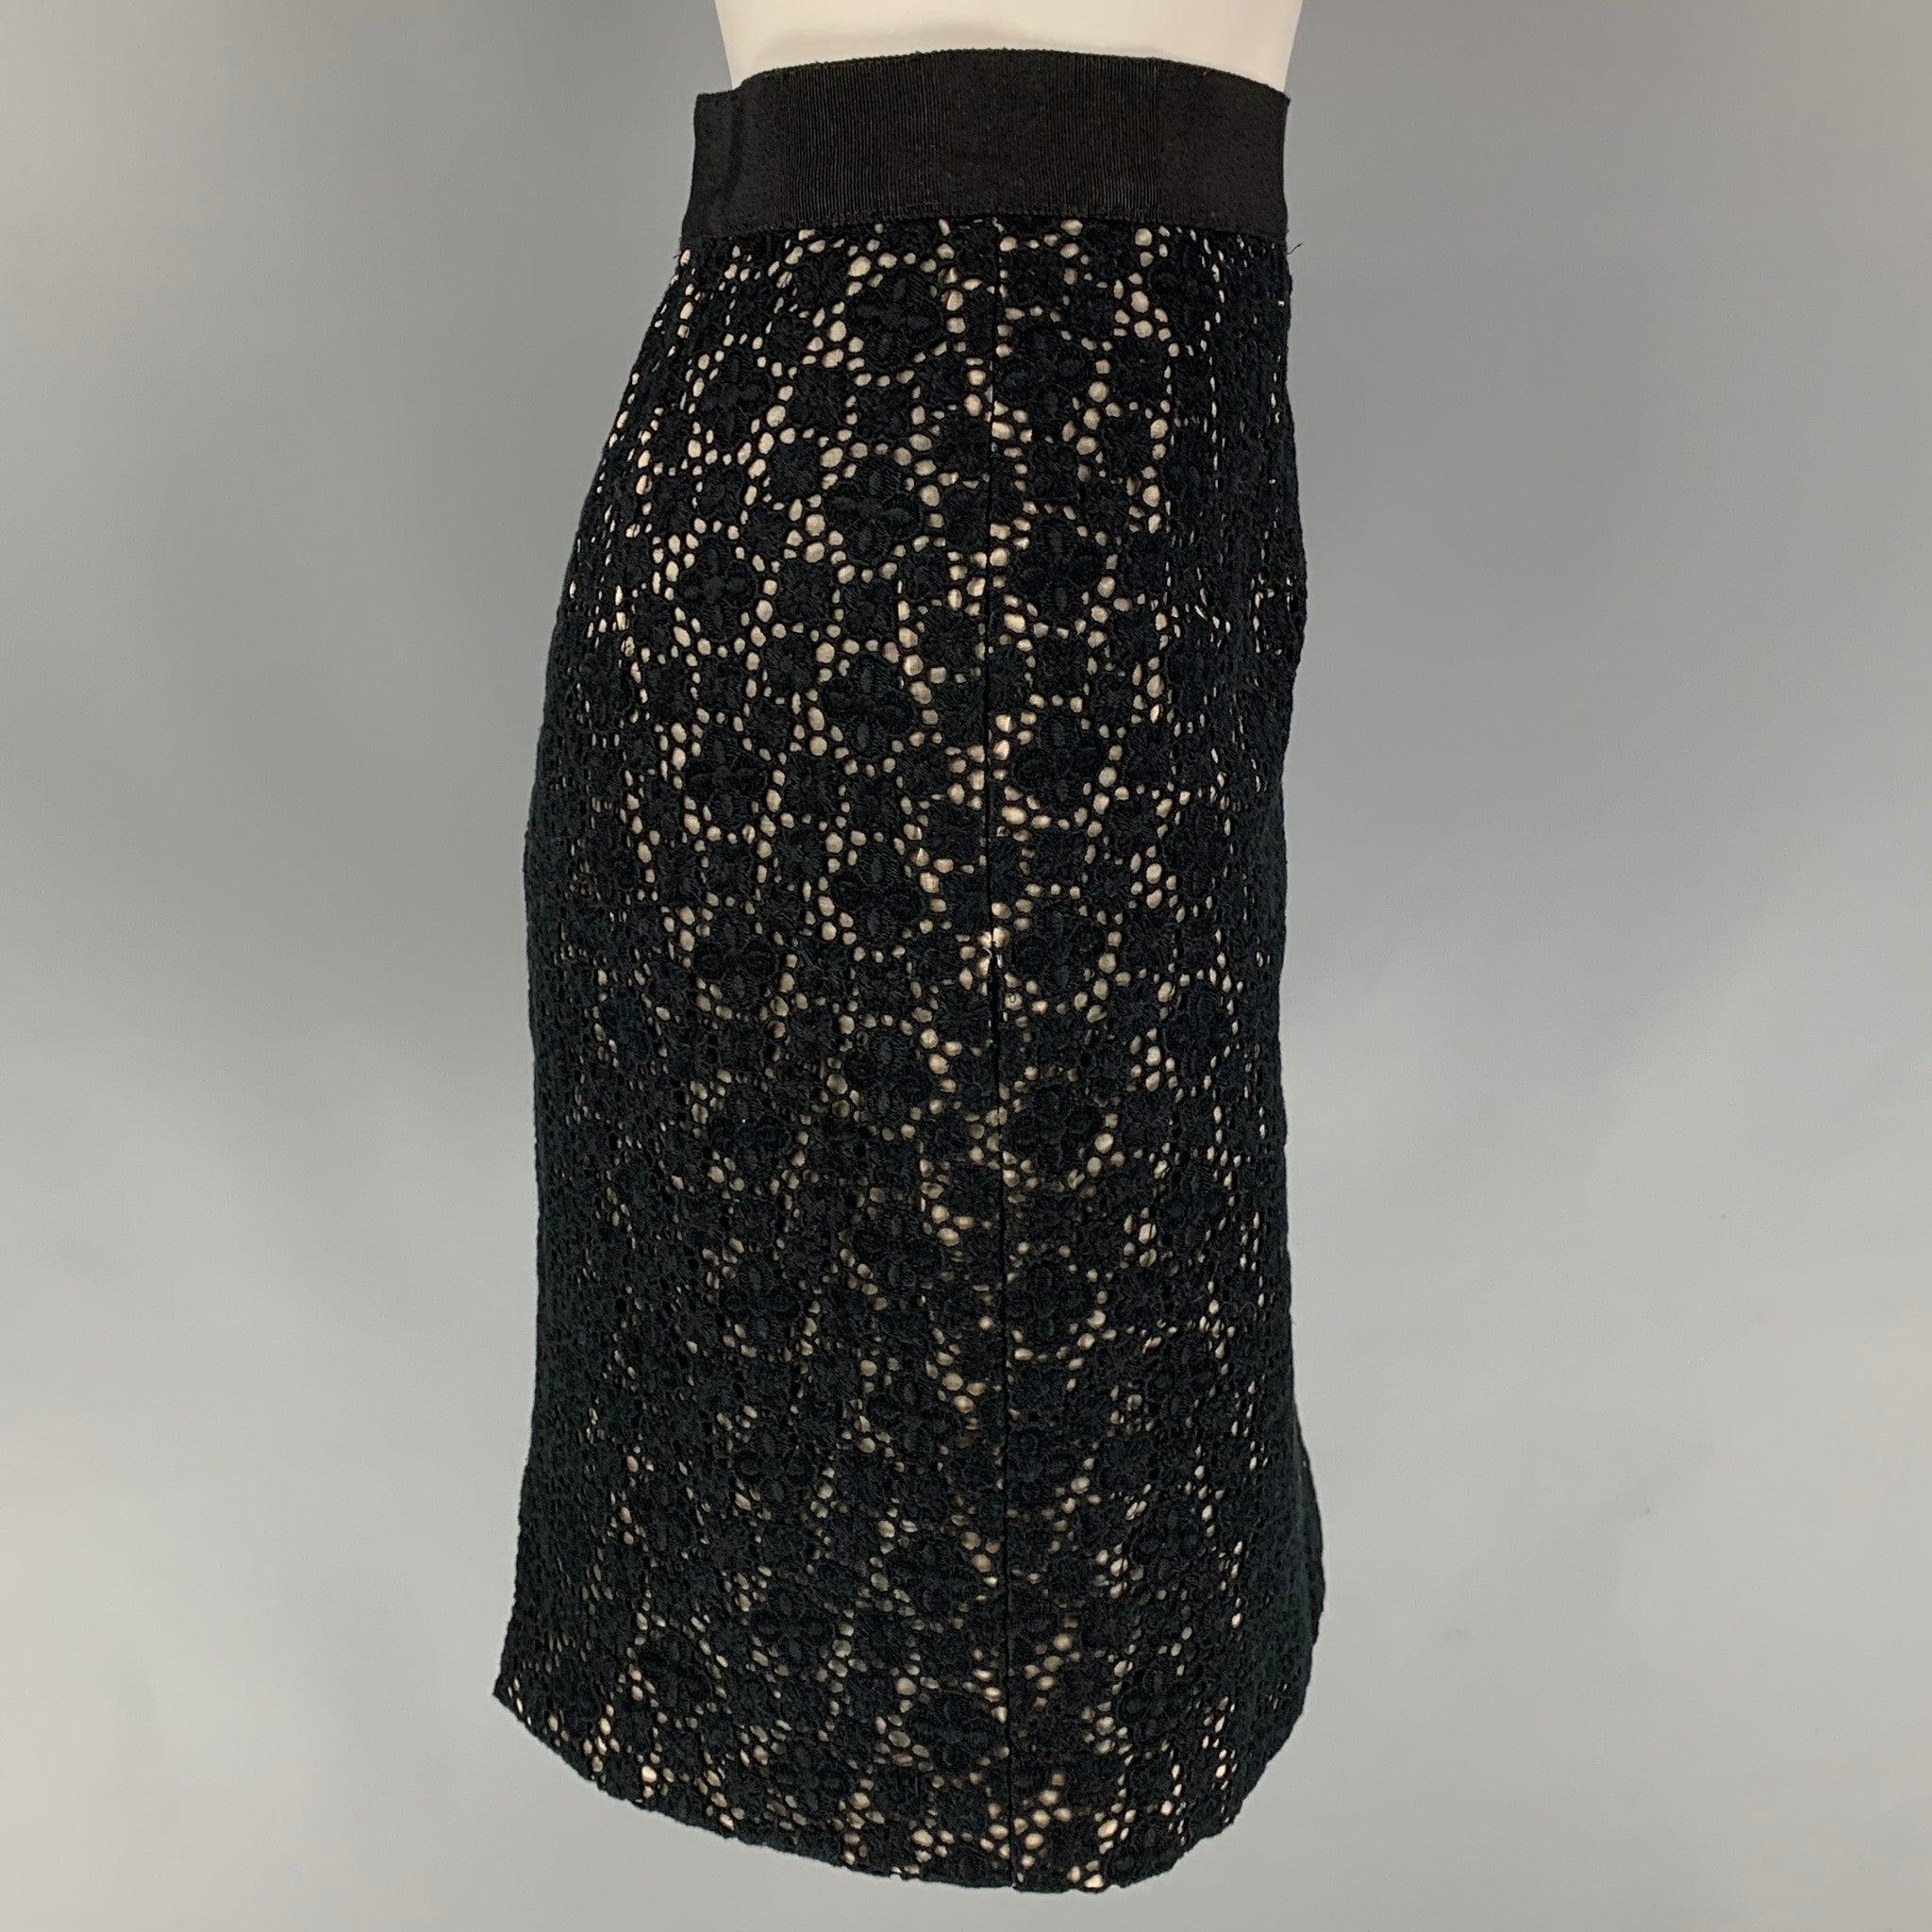 GIAMBATTISTA VALLI skirt comes in a black guipure cotton featuring a pencil style featuring a pencil style, back slit, ribbon trim, and a zipper closure. Made in Italy.
Very Good
Pre-Owned Condition. 

Marked:   42/S 

Measurements: 
  Waist: 30